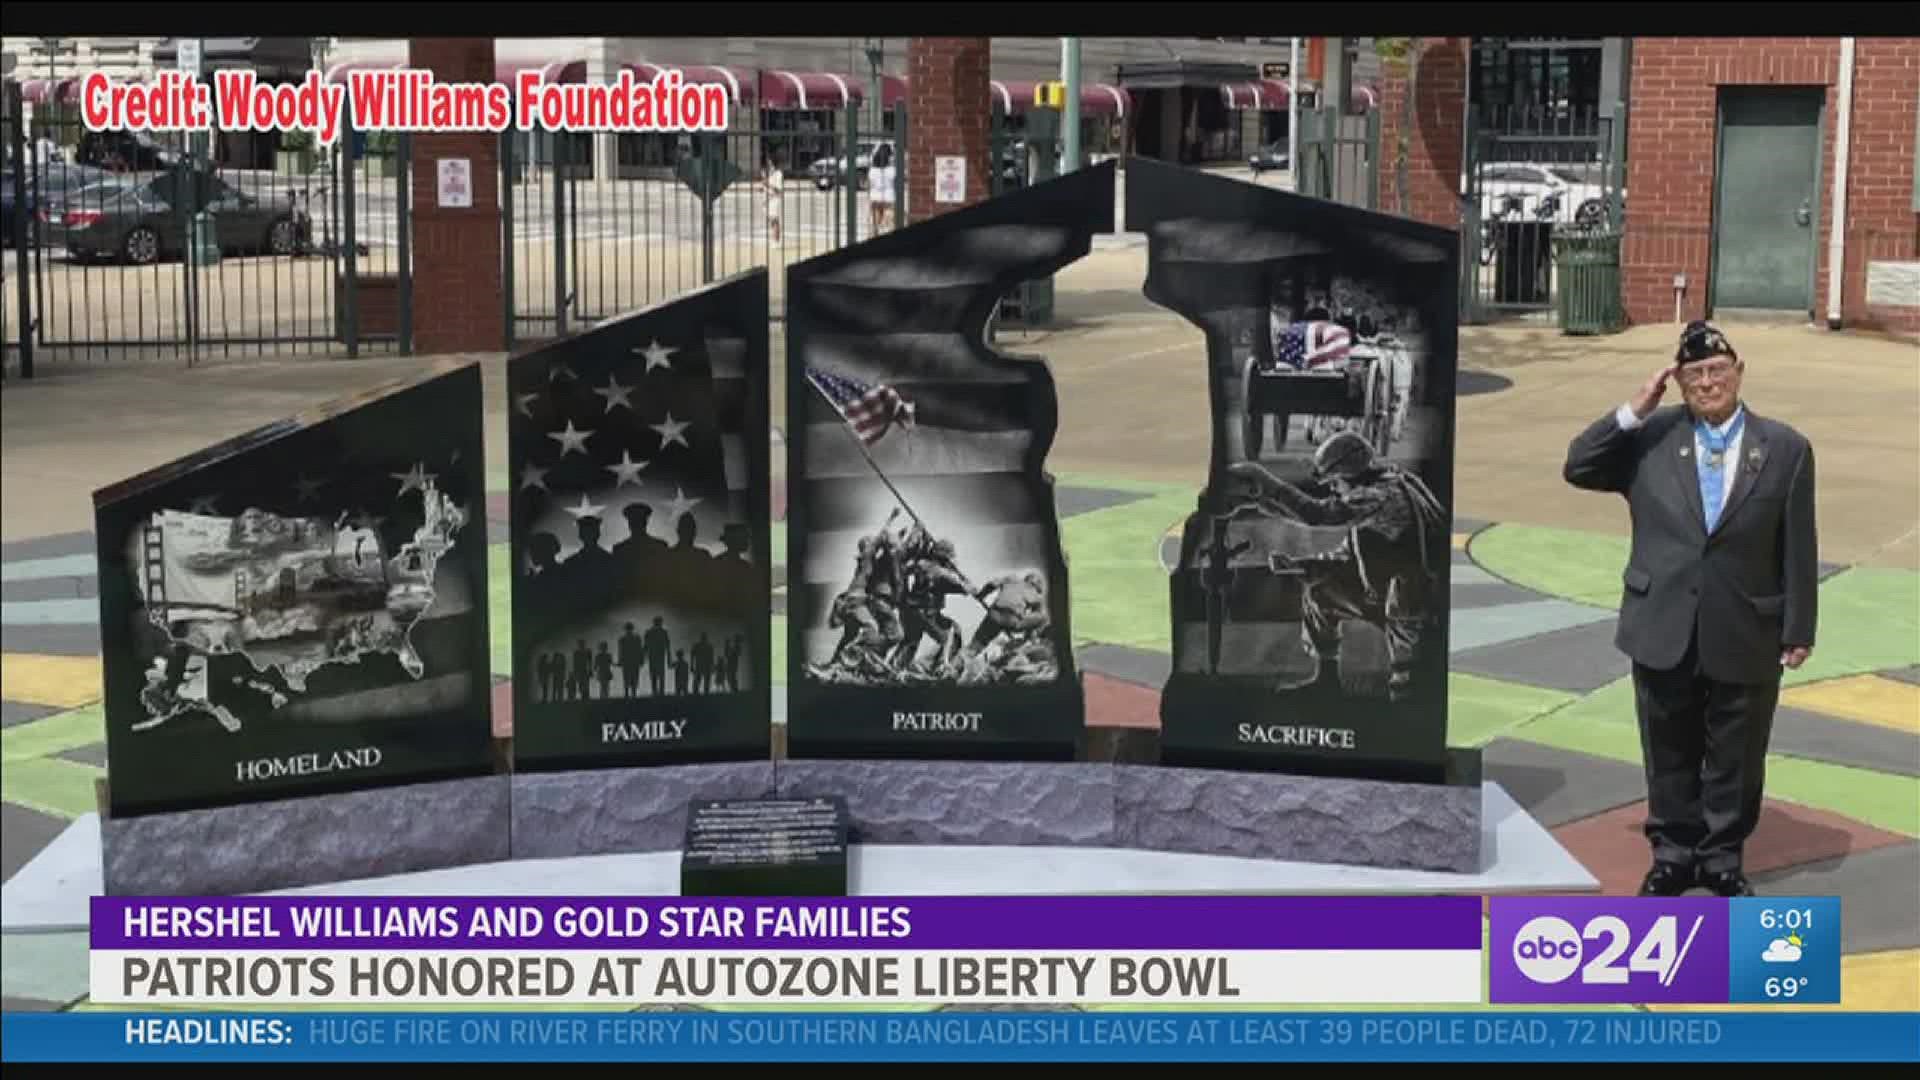 The 63rd AutoZone Liberty Bowl will continue its patriotic history and pay tribute to Hershel Williams and Gold Star Families across the United States.